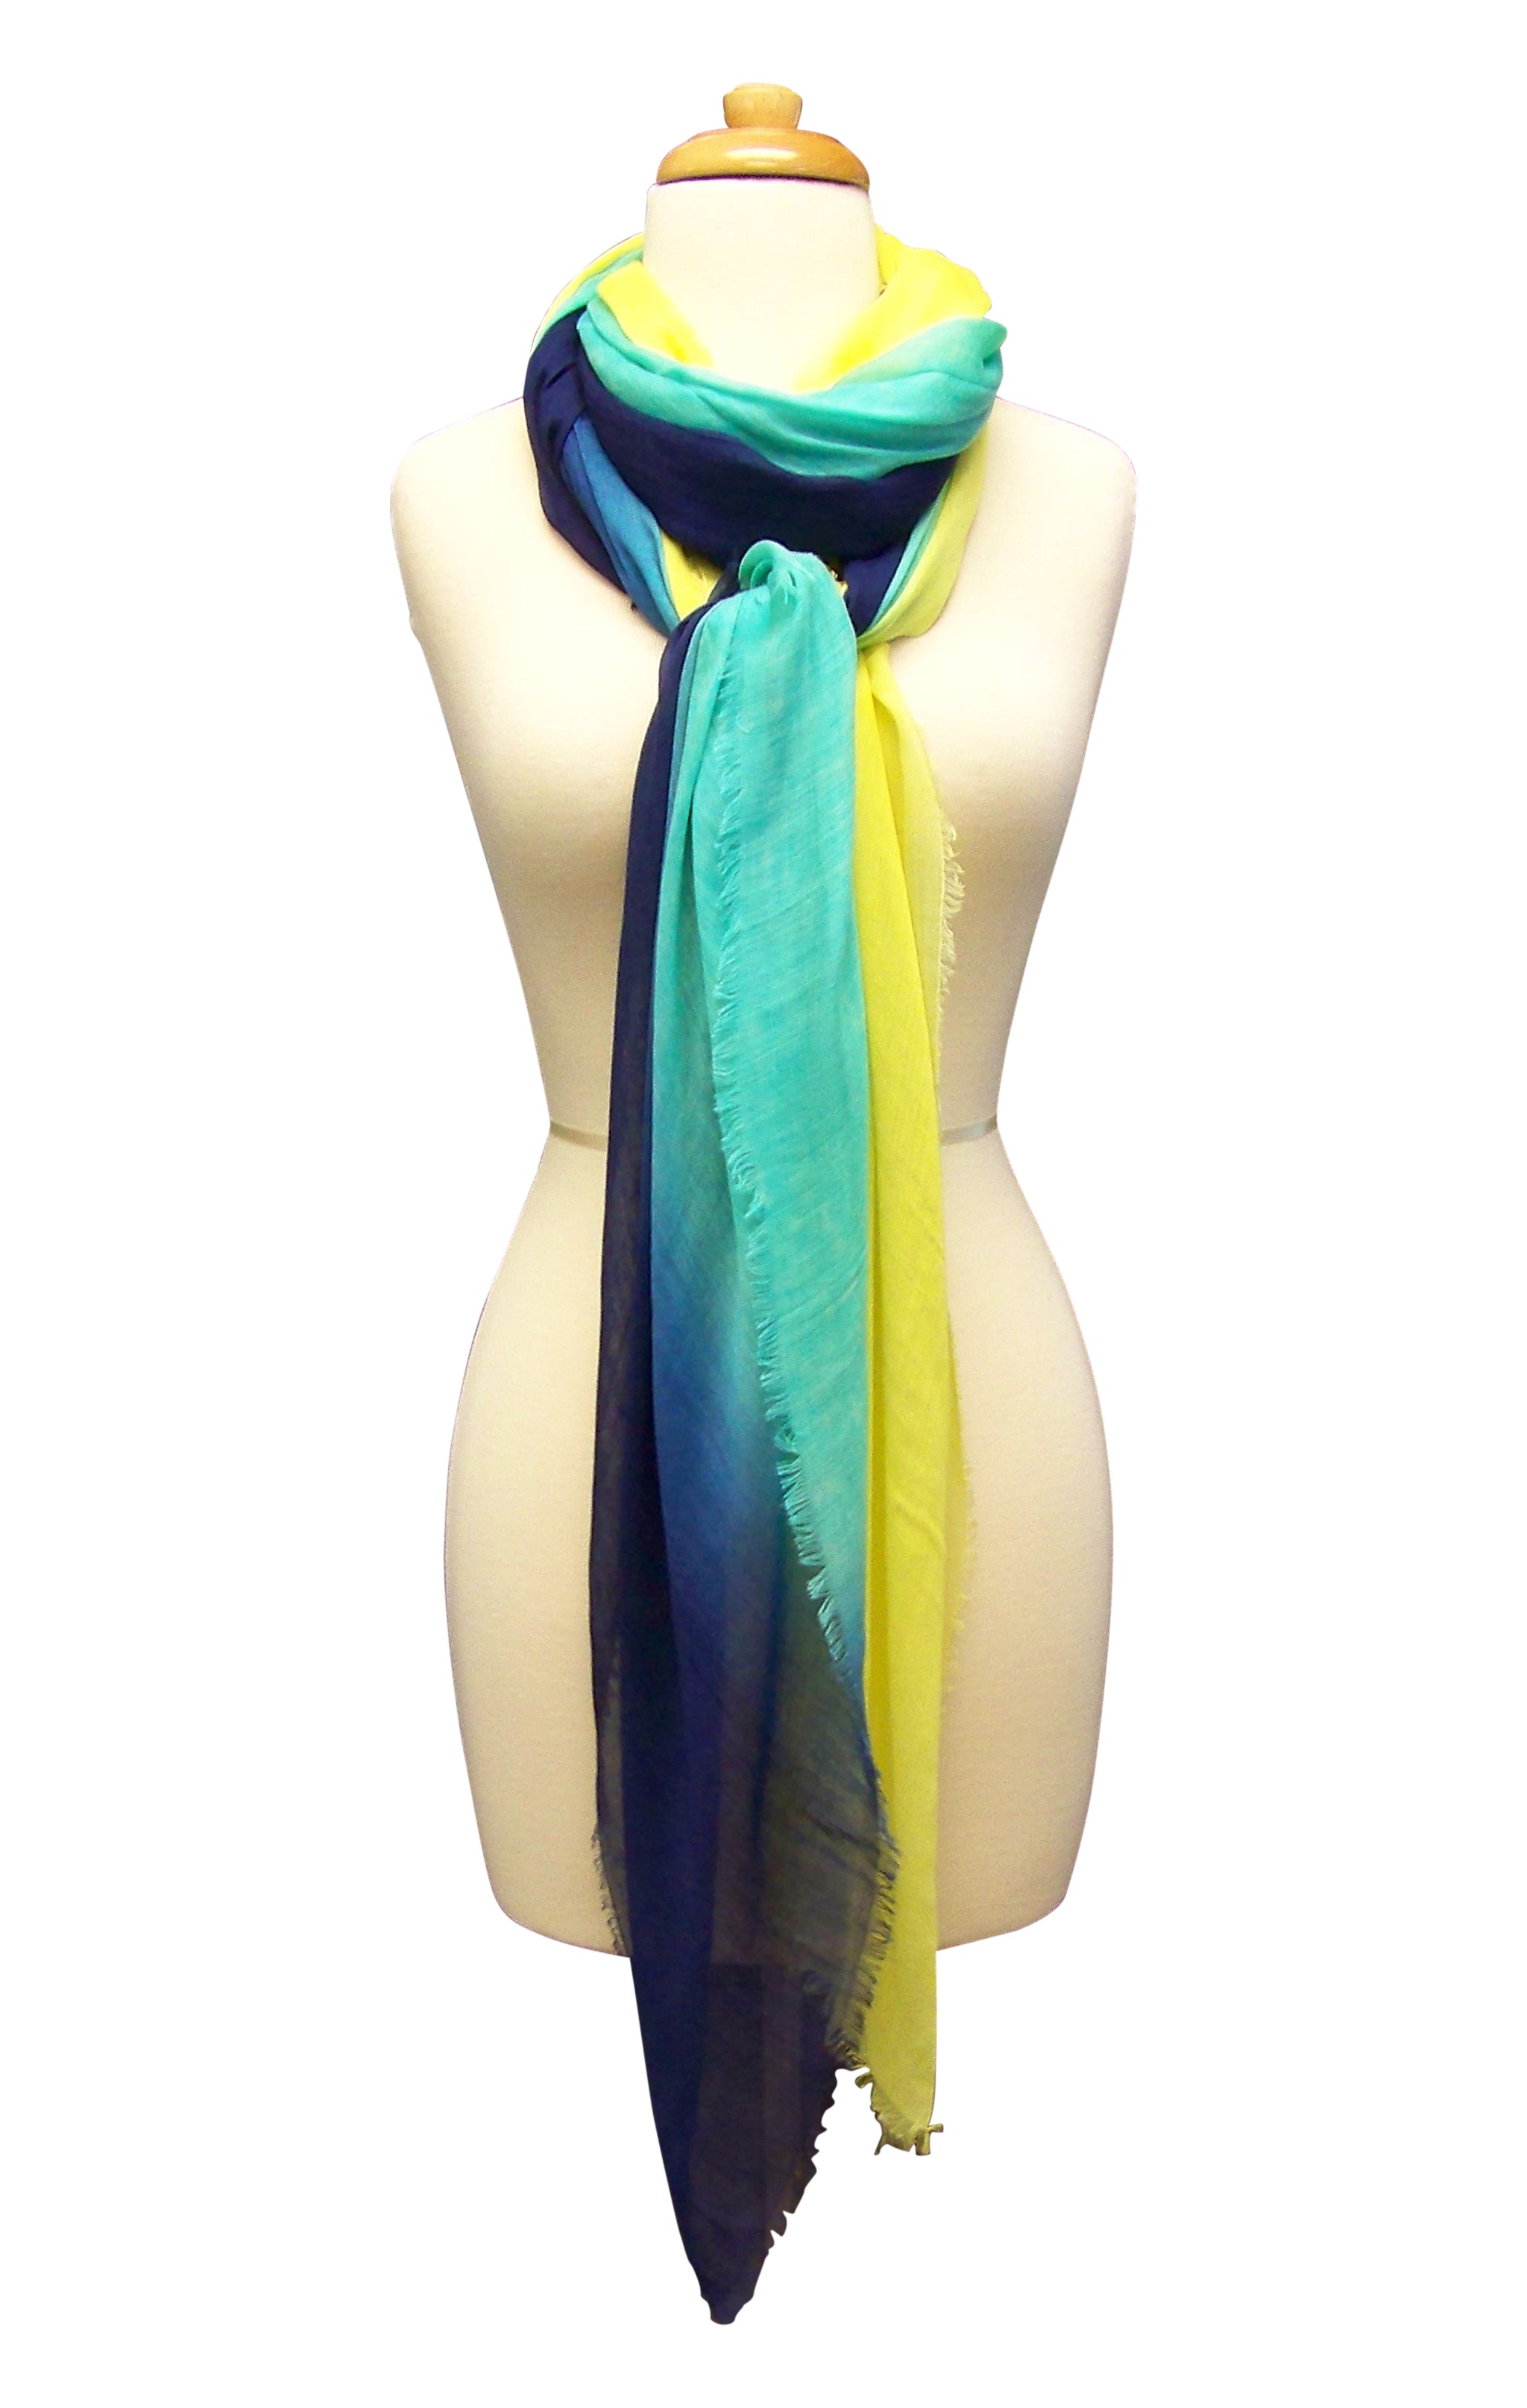 Mannequin Wearing Blue Pacific Dream Cashmere and Silk Scarf in Navy Bright Turquoise Yellow